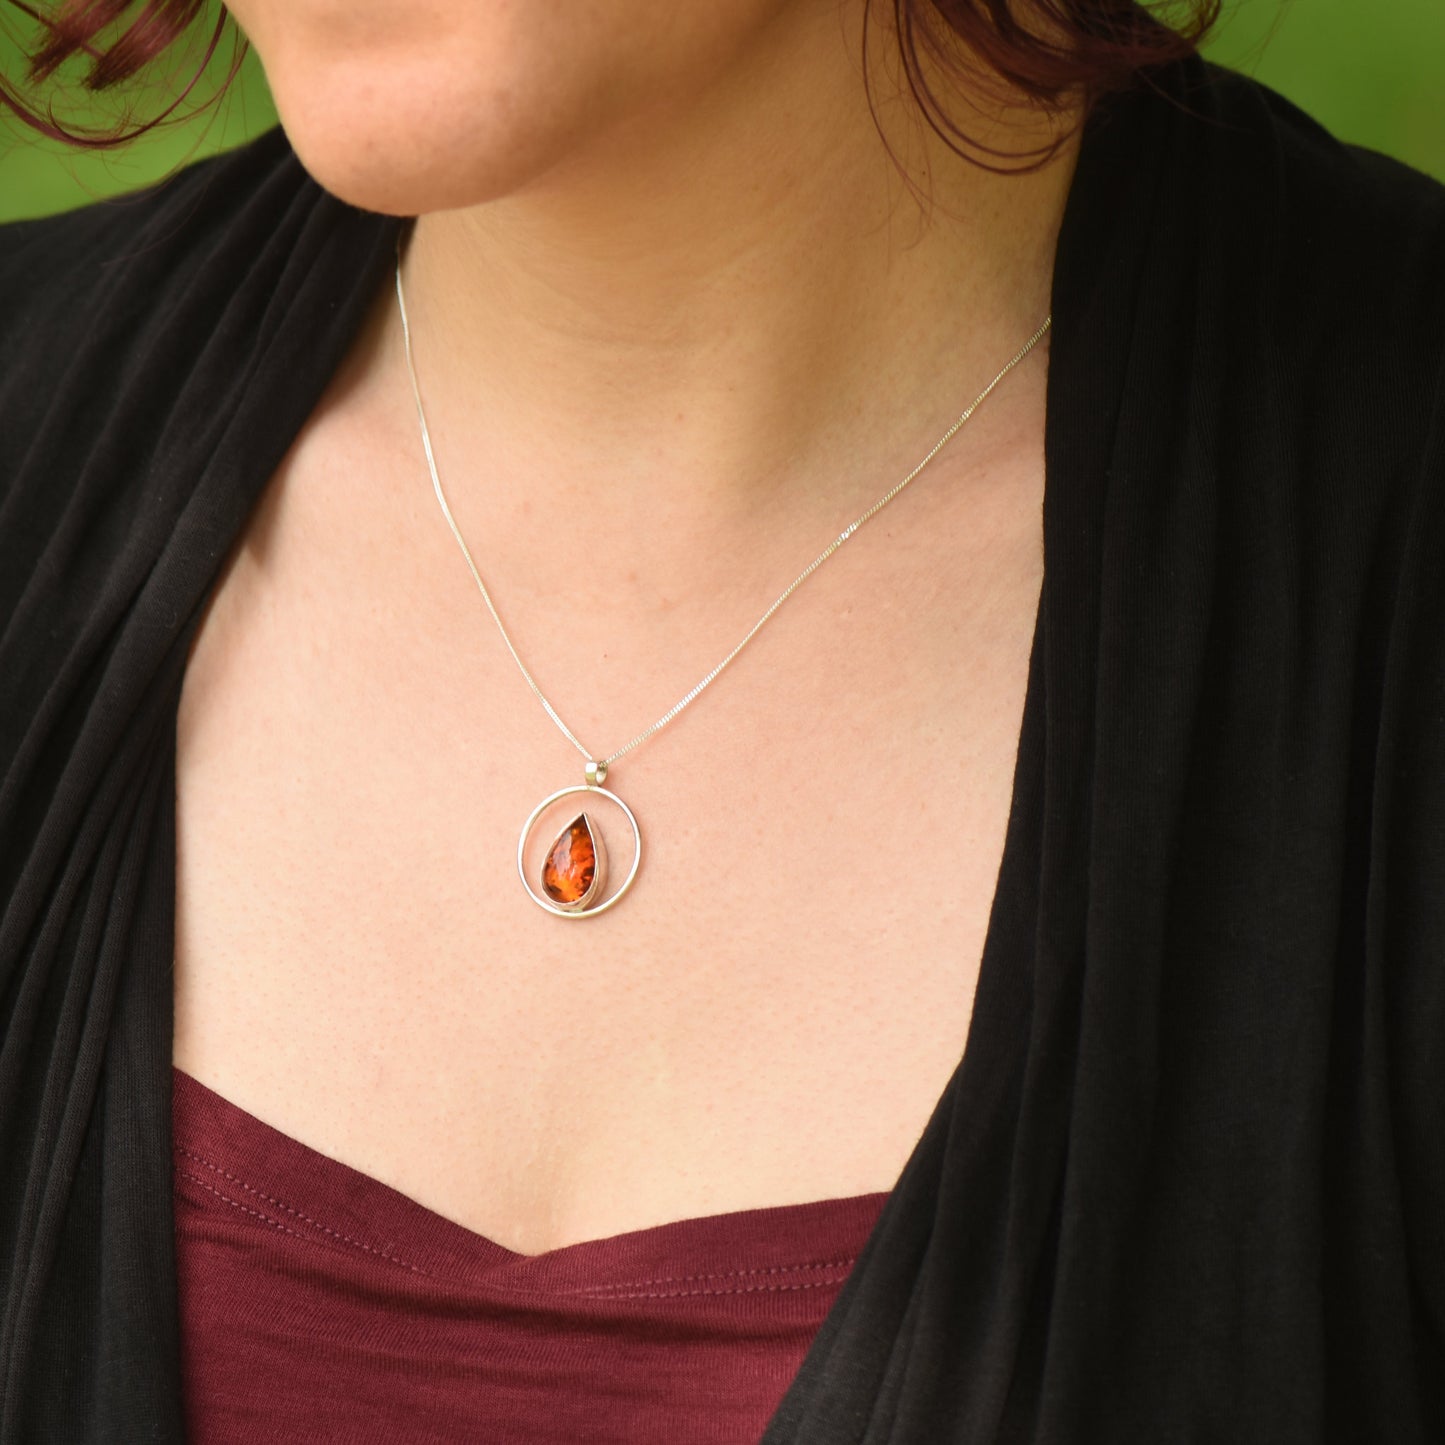 Amber in a circle Sterling Silver Pendant